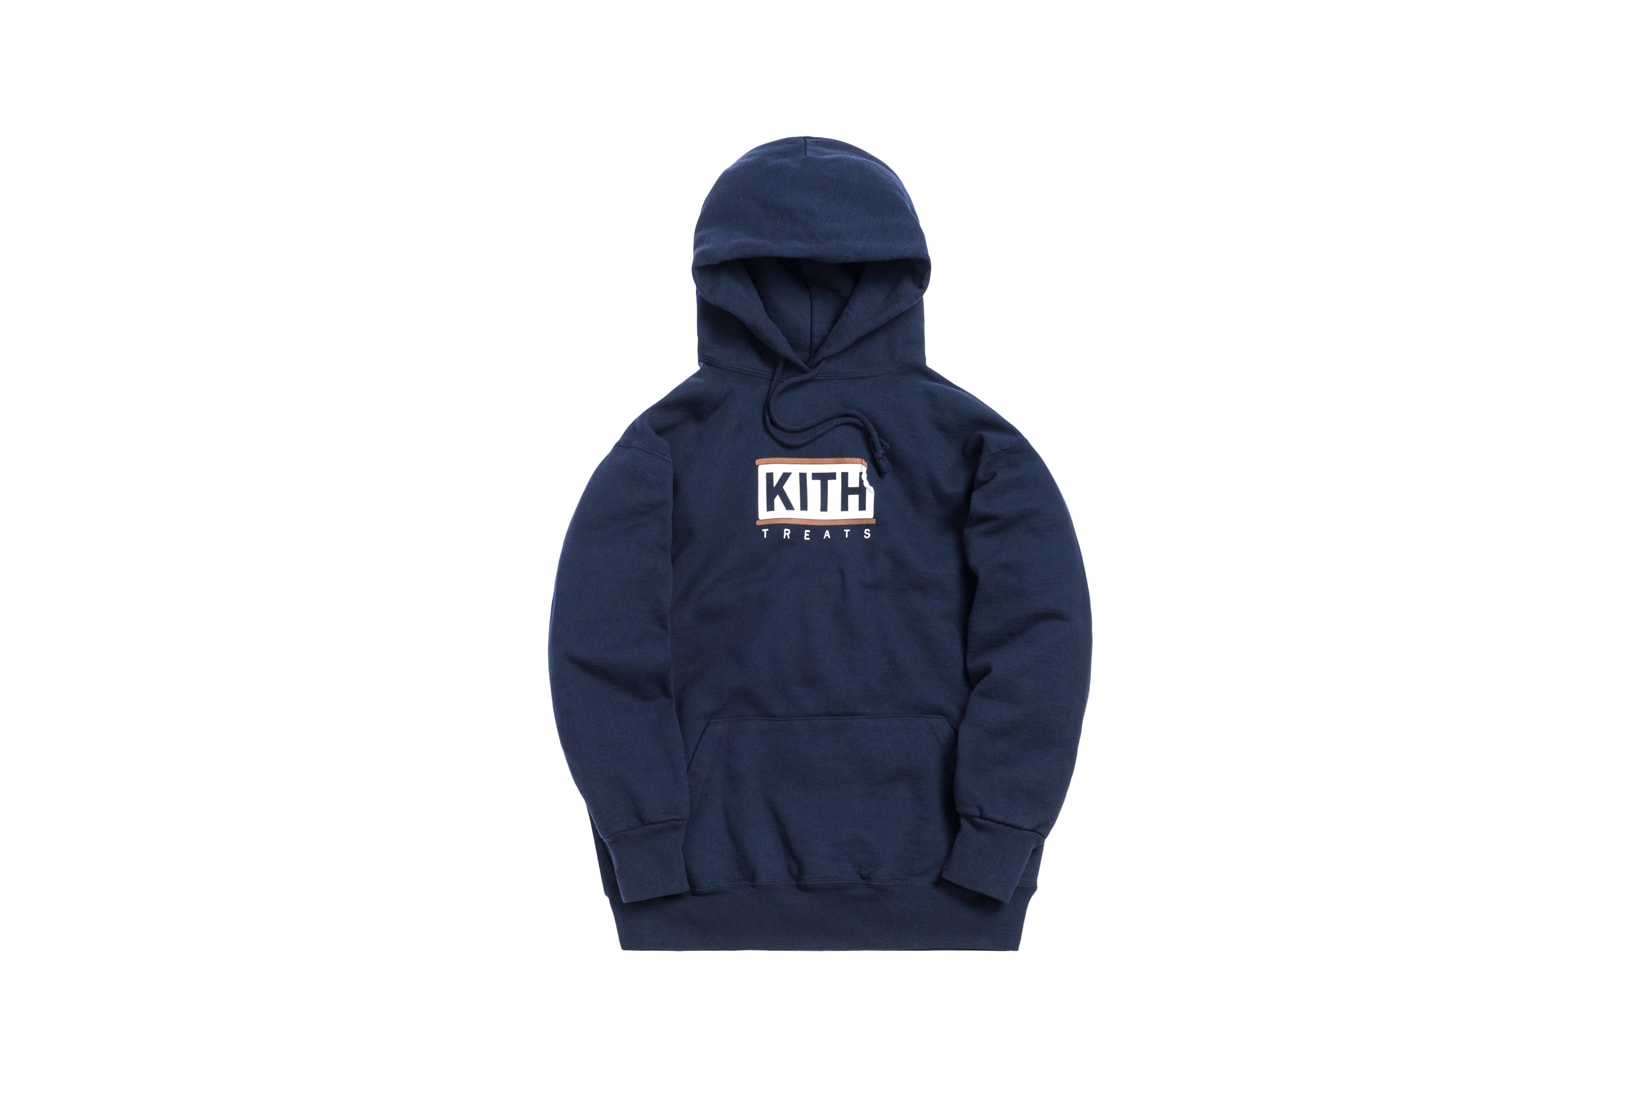 KITH Treats Capsule Collection Hoodie Navy